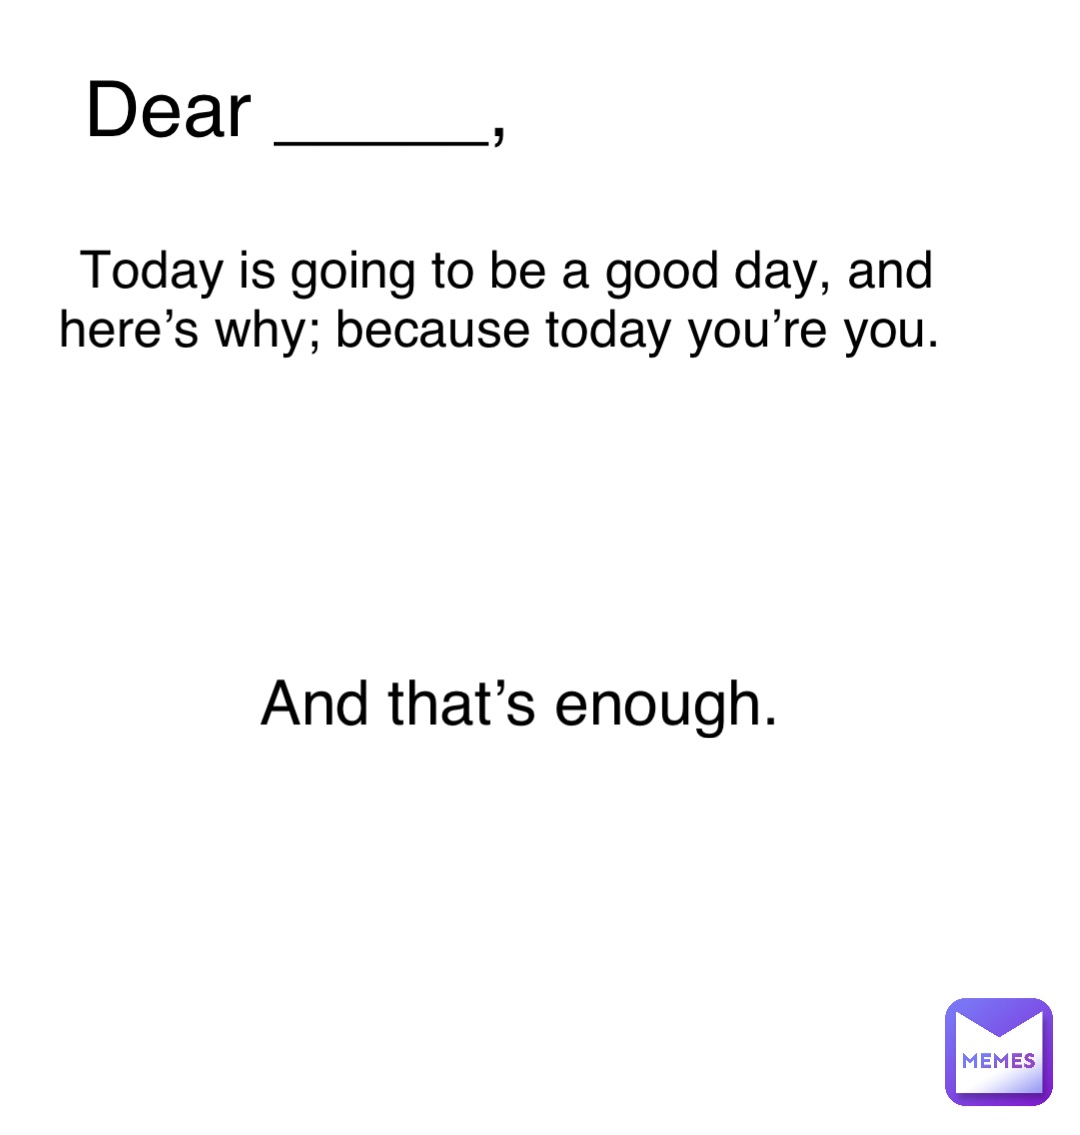 Dear _____, Today is going to be a good day, and here’s why; because today you’re you. And that’s enough.